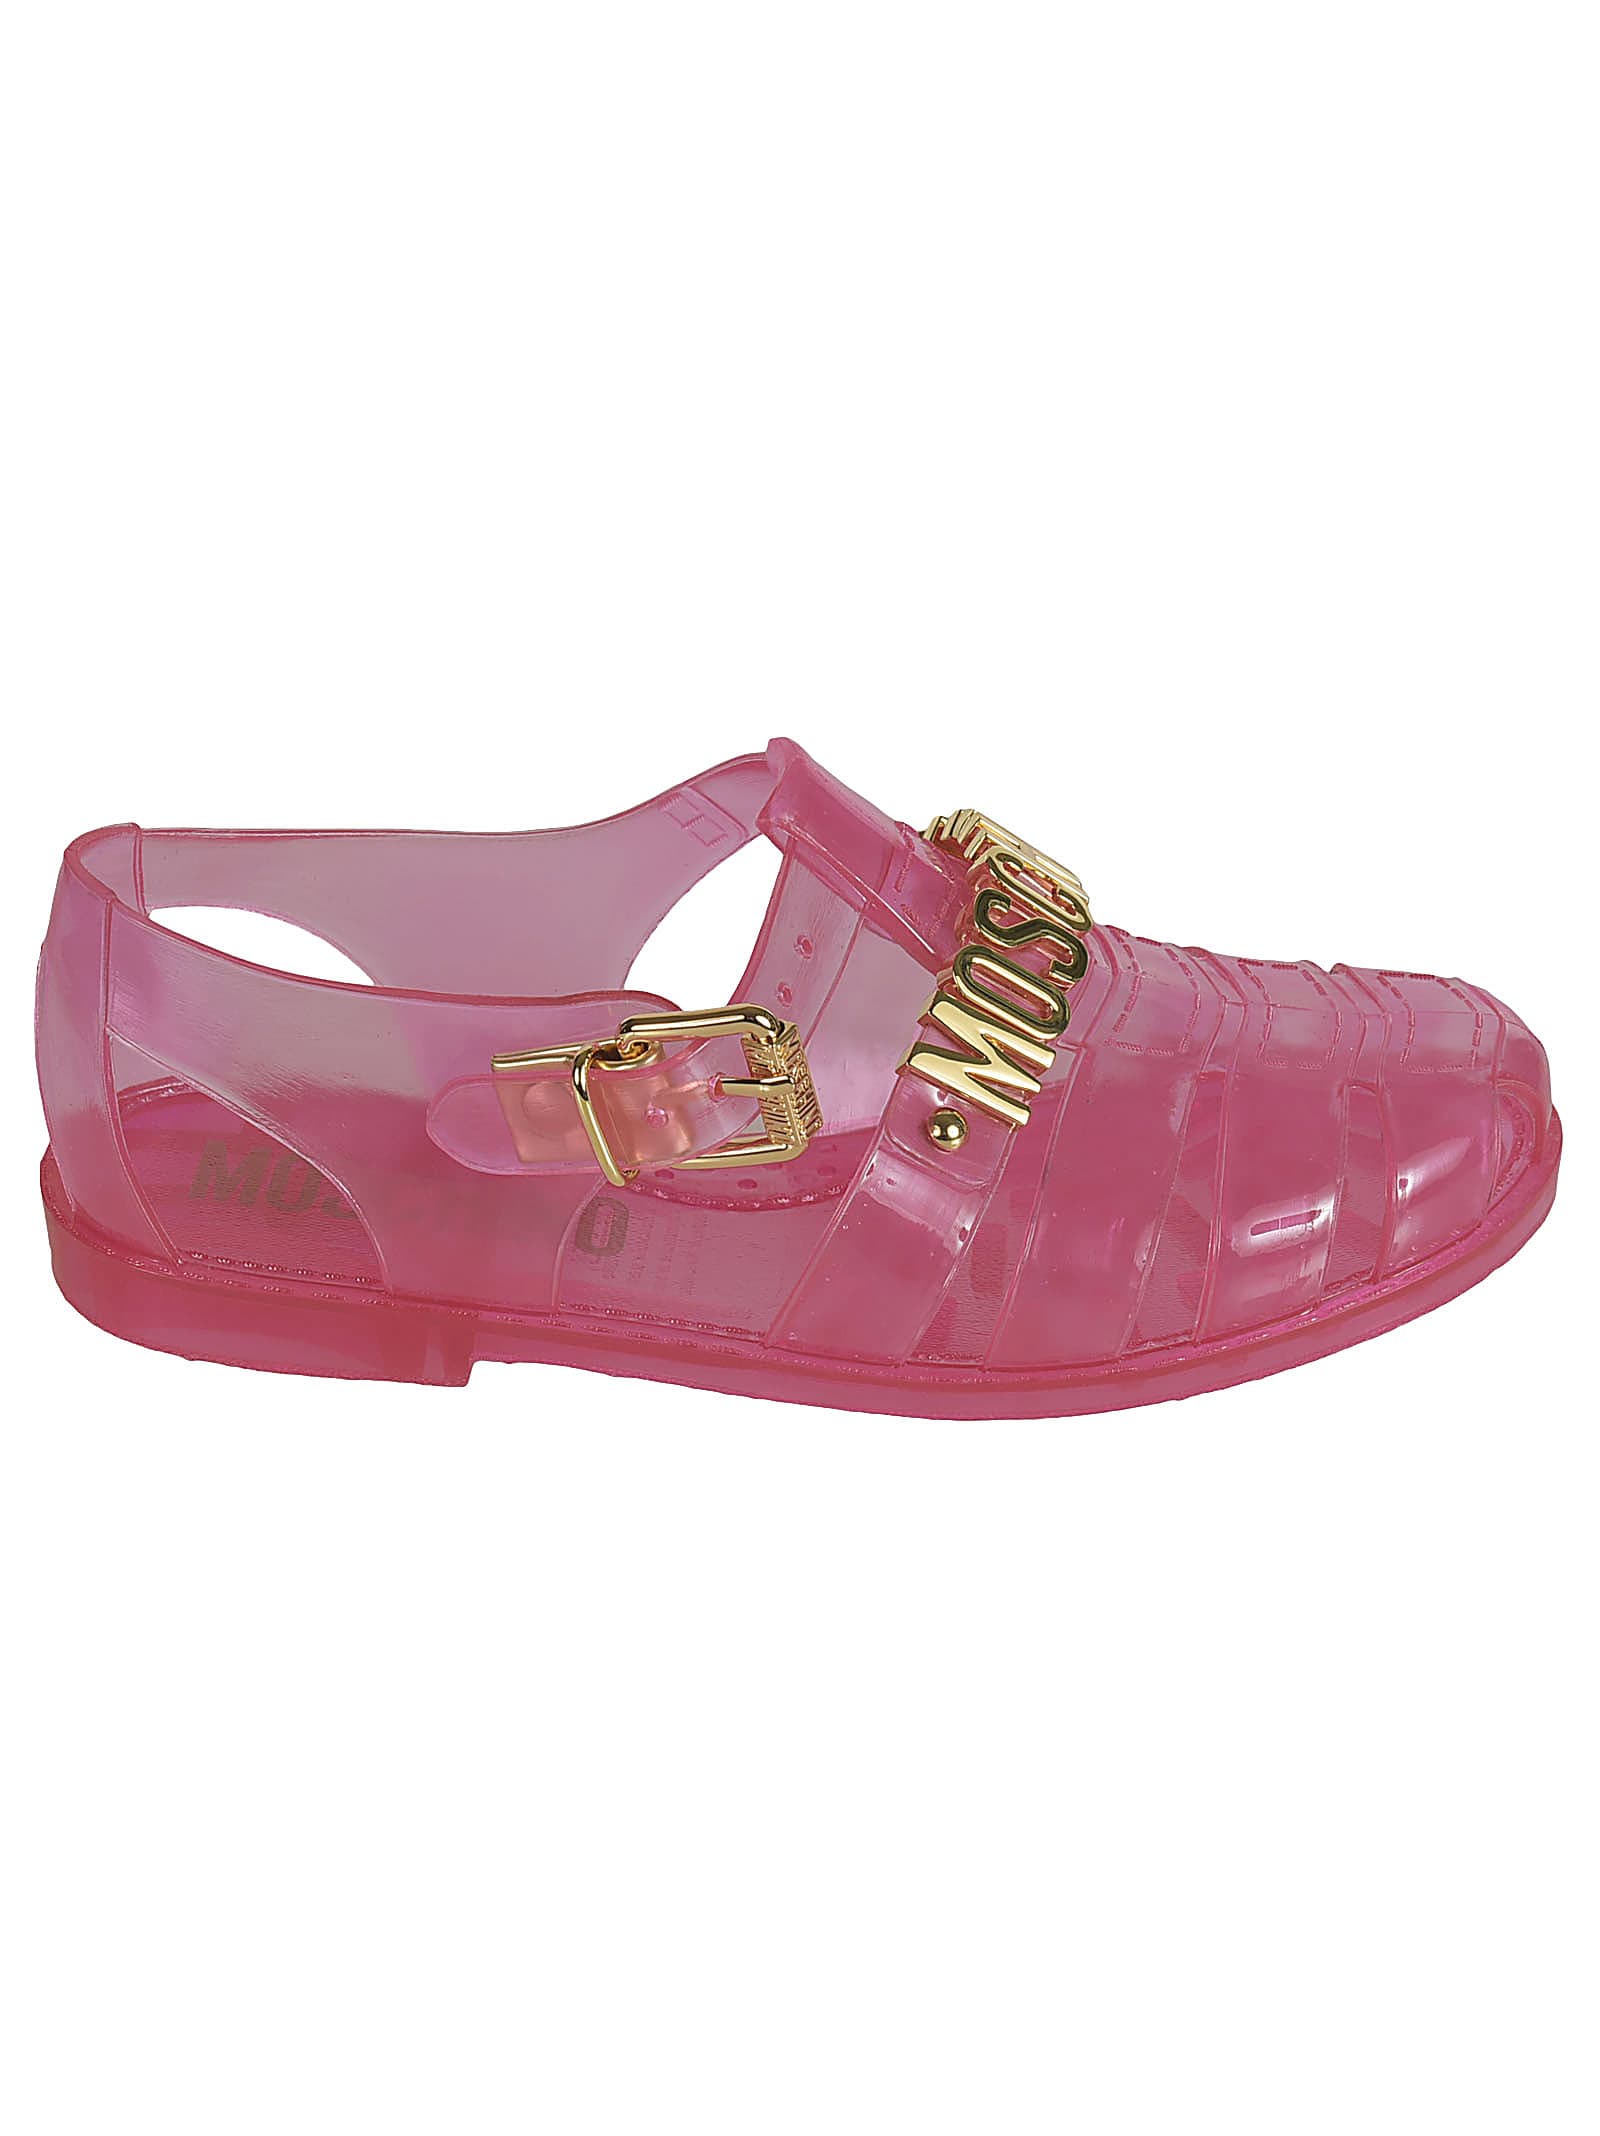 Buy Moschino Jelly 15 Sandals online, shop Moschino shoes with free shipping